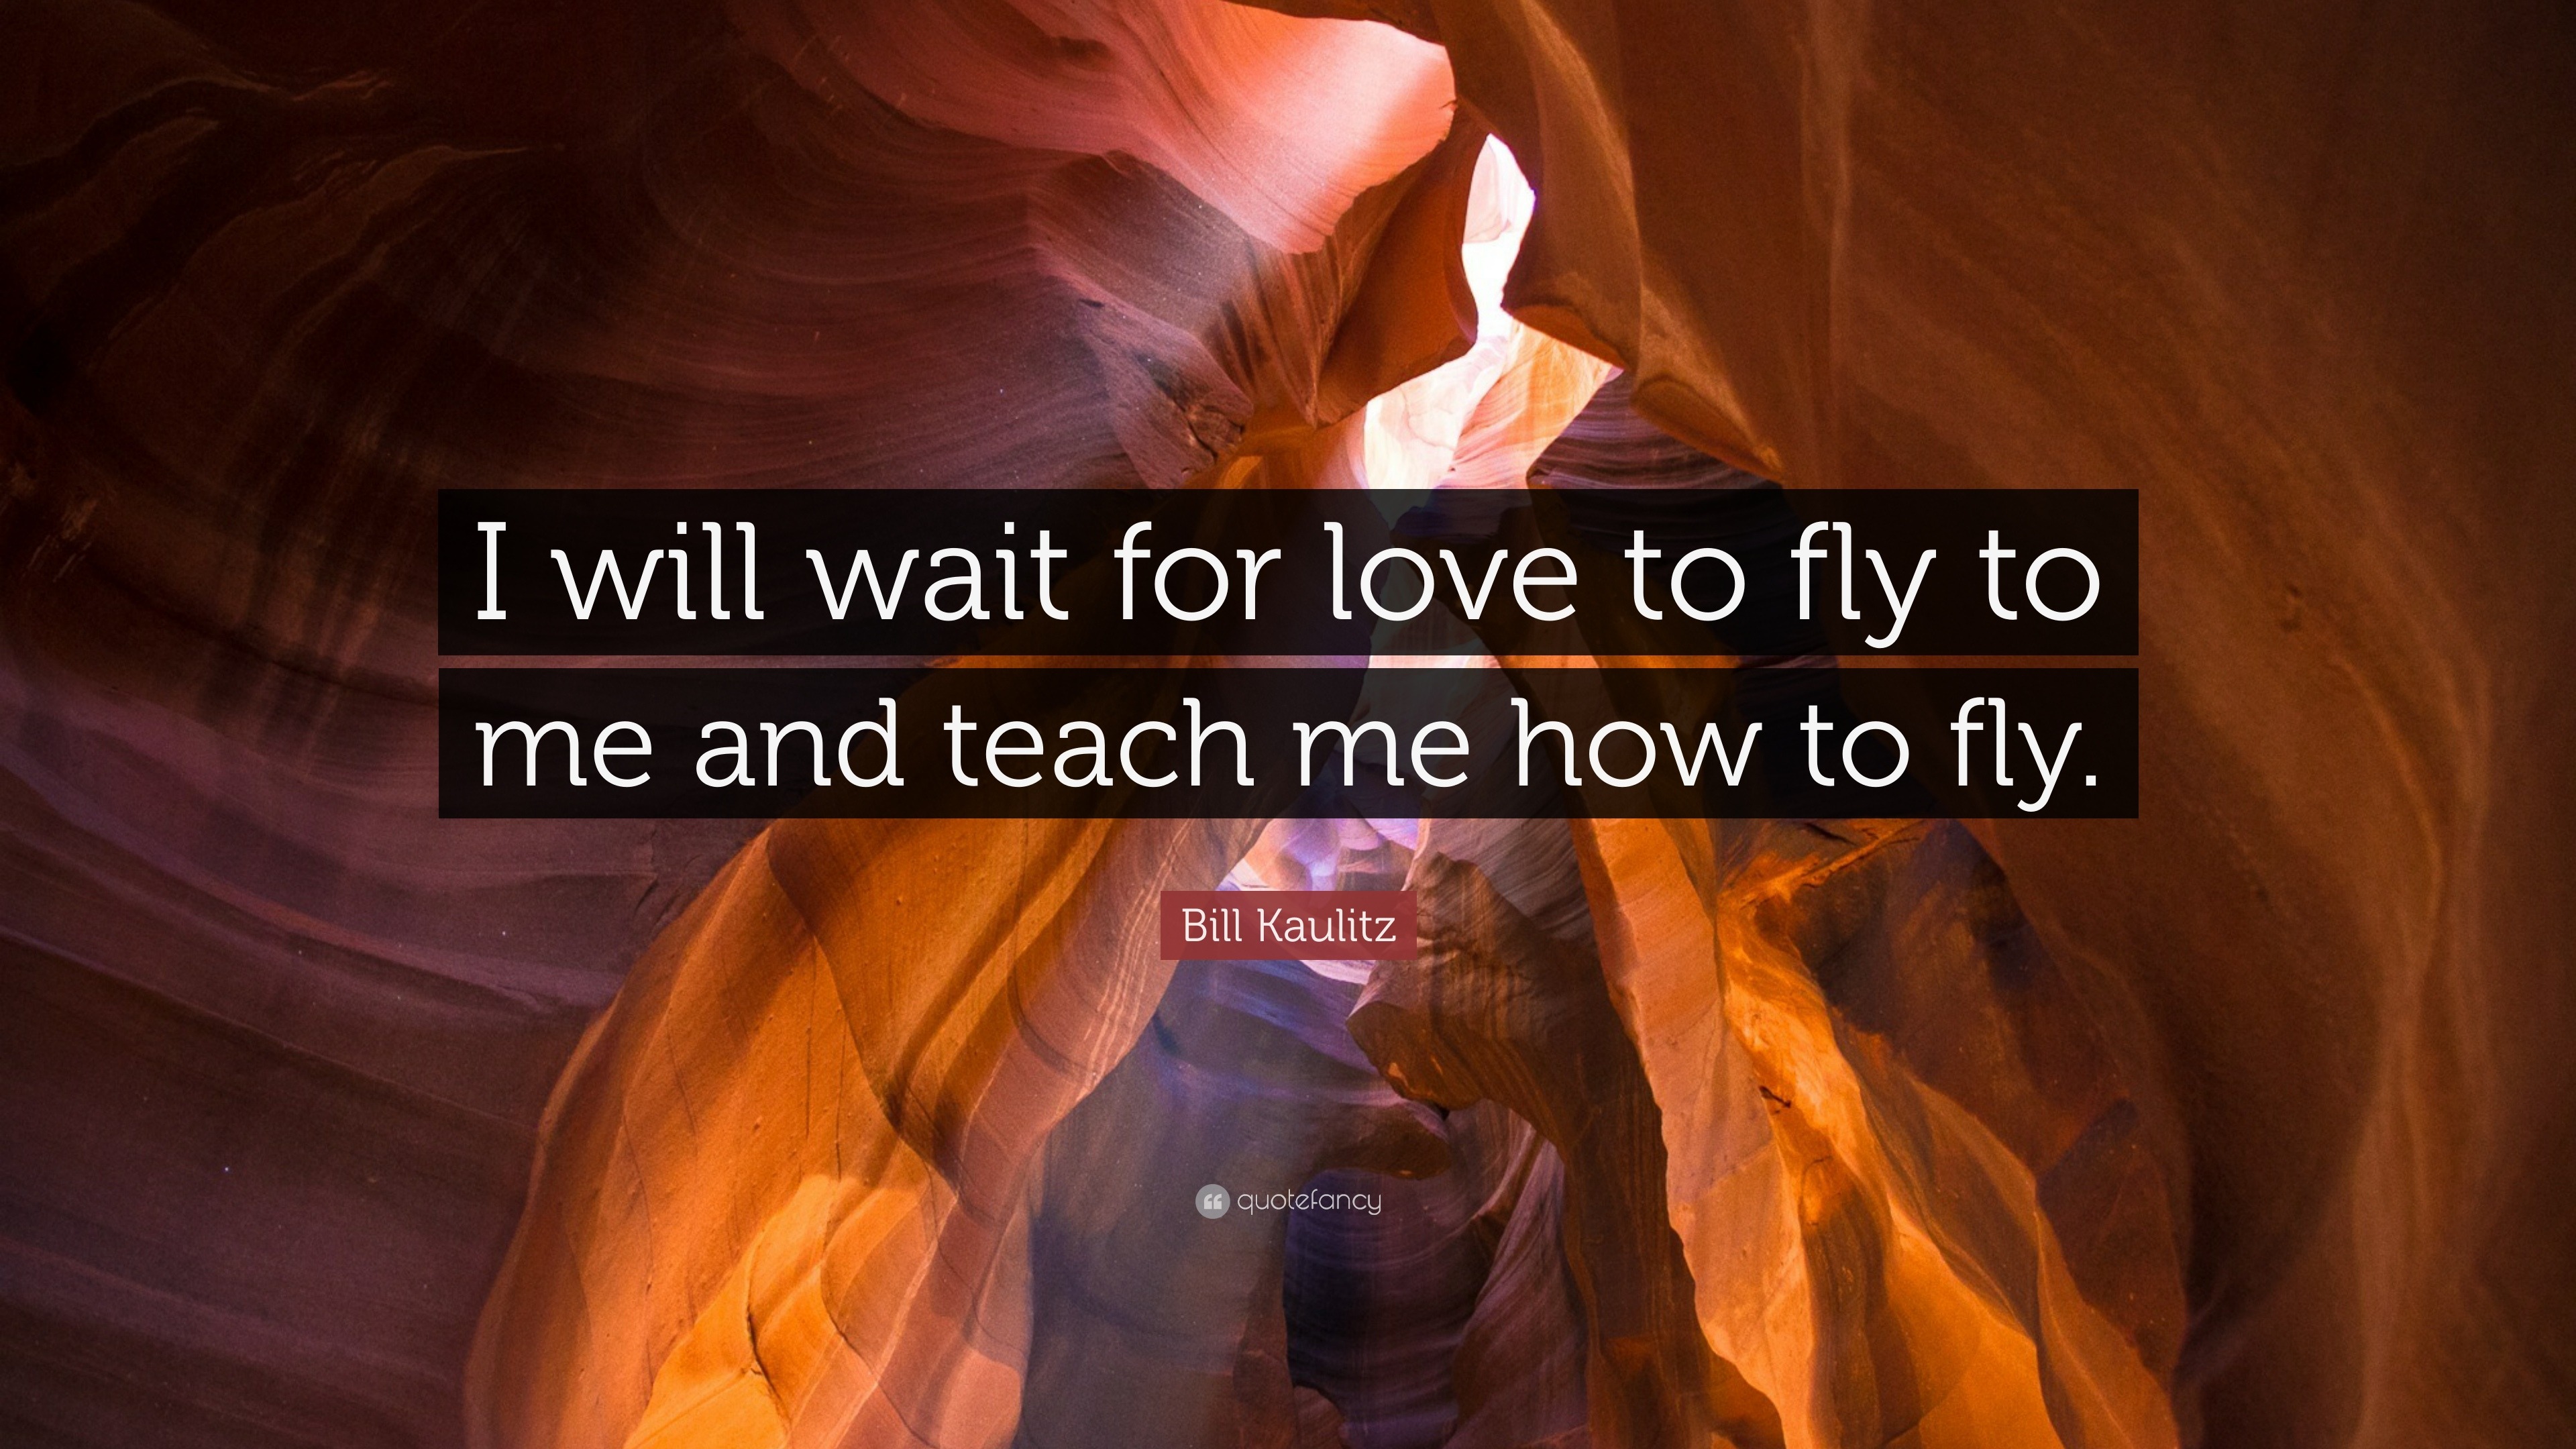 Bill Kaulitz Quote I Will Wait For Love To Fly To Me And Teach Me How